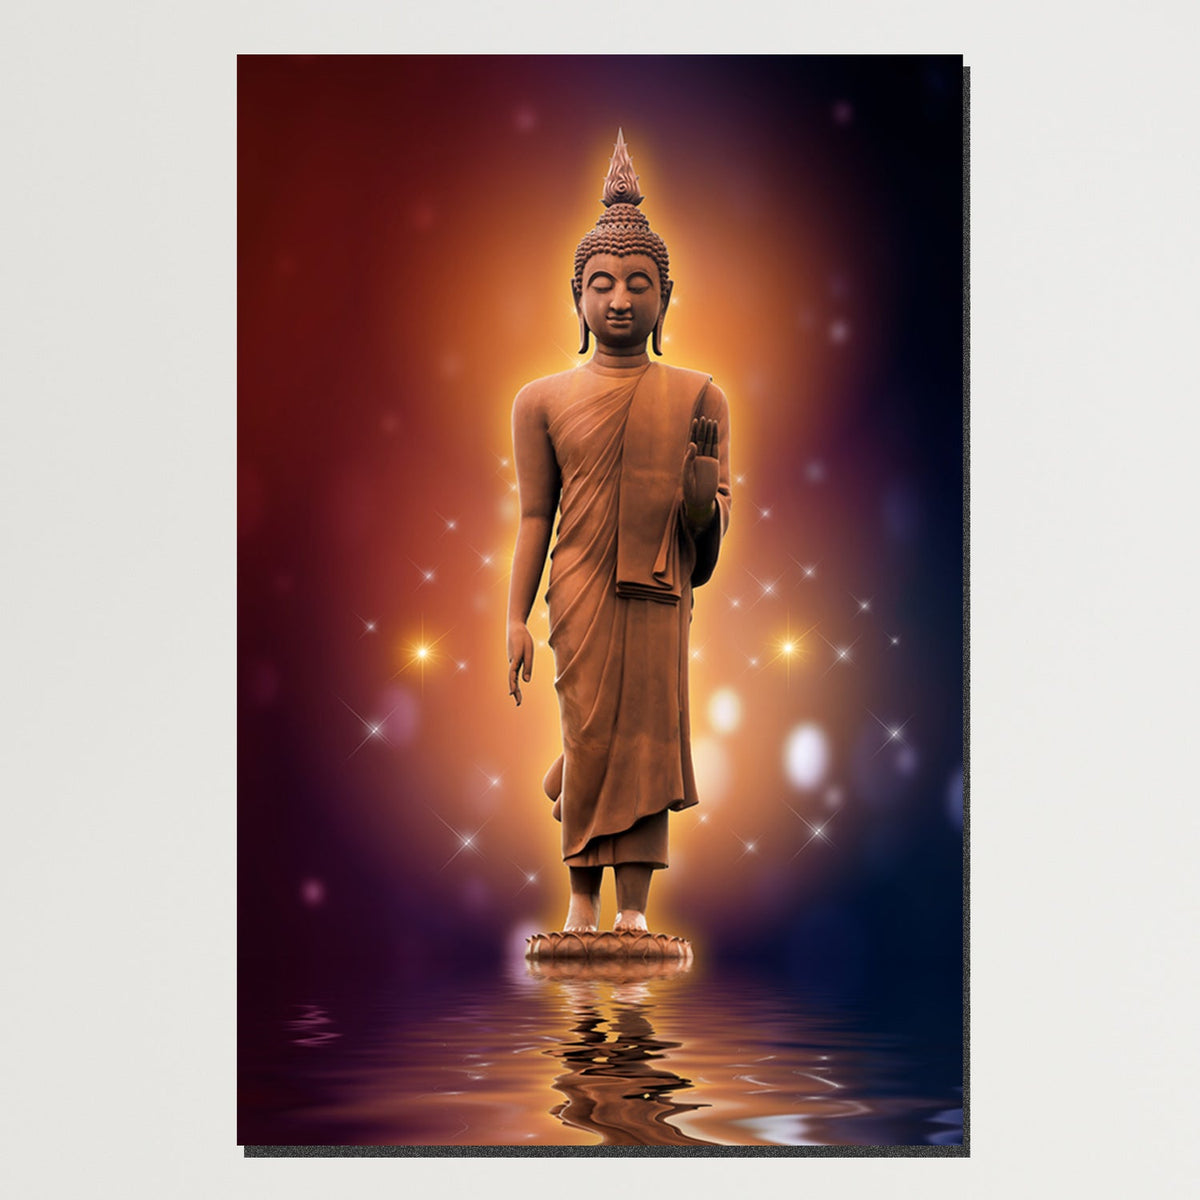 https://cdn.shopify.com/s/files/1/0387/9986/8044/products/BuddhaonWaterCanvasArtprintStretched-Plain.jpg